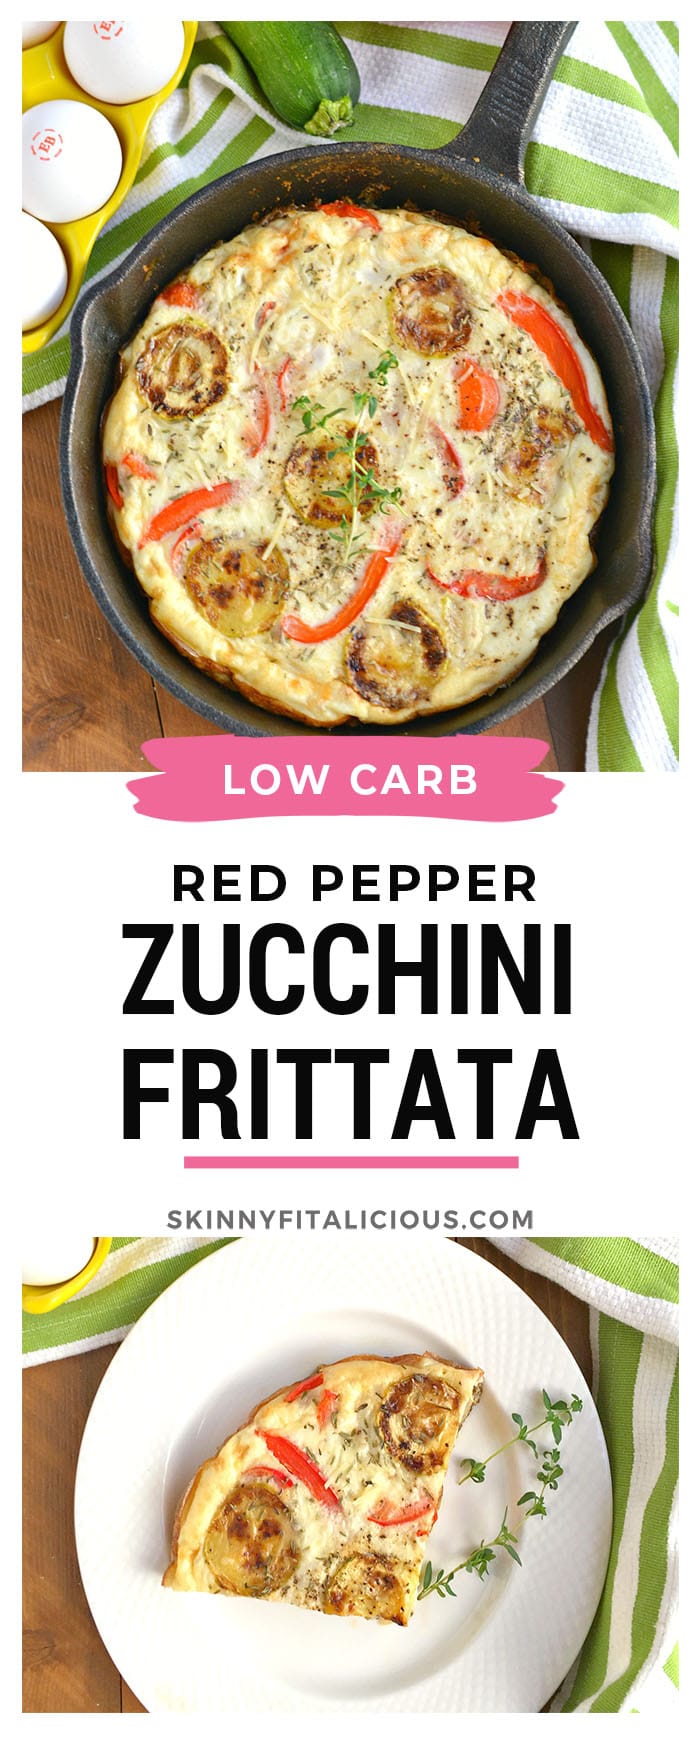 Low Carb Red Pepper Zucchini Frittata! A high protein, veggie packed Paleo breakfast. No crust, easy to make, filling with delicious flavors! 